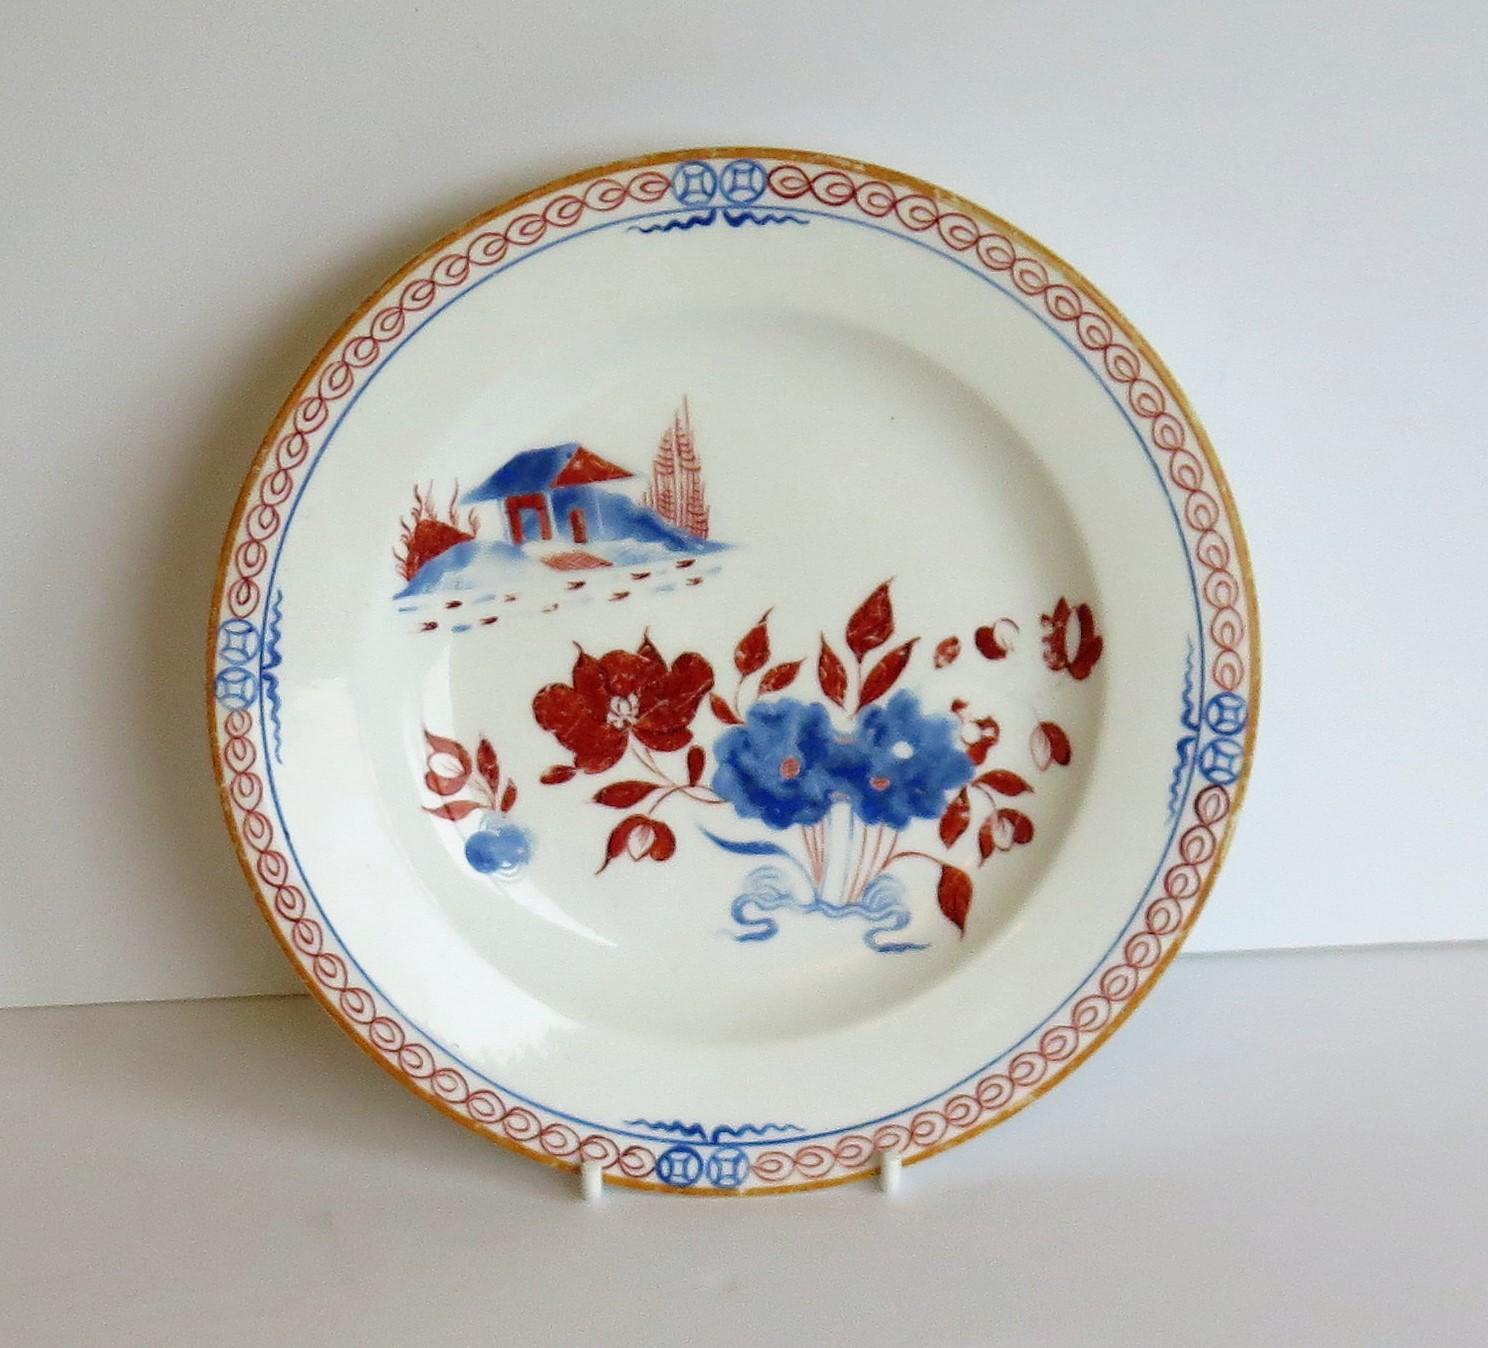 This is a good early English Spode porcelain plate or dish hand painted in the Doll's House pattern, Number 488 and dating to the George 111rd period, very early in the 19th century.

The plate is well potted and raised on a low foot. It is well